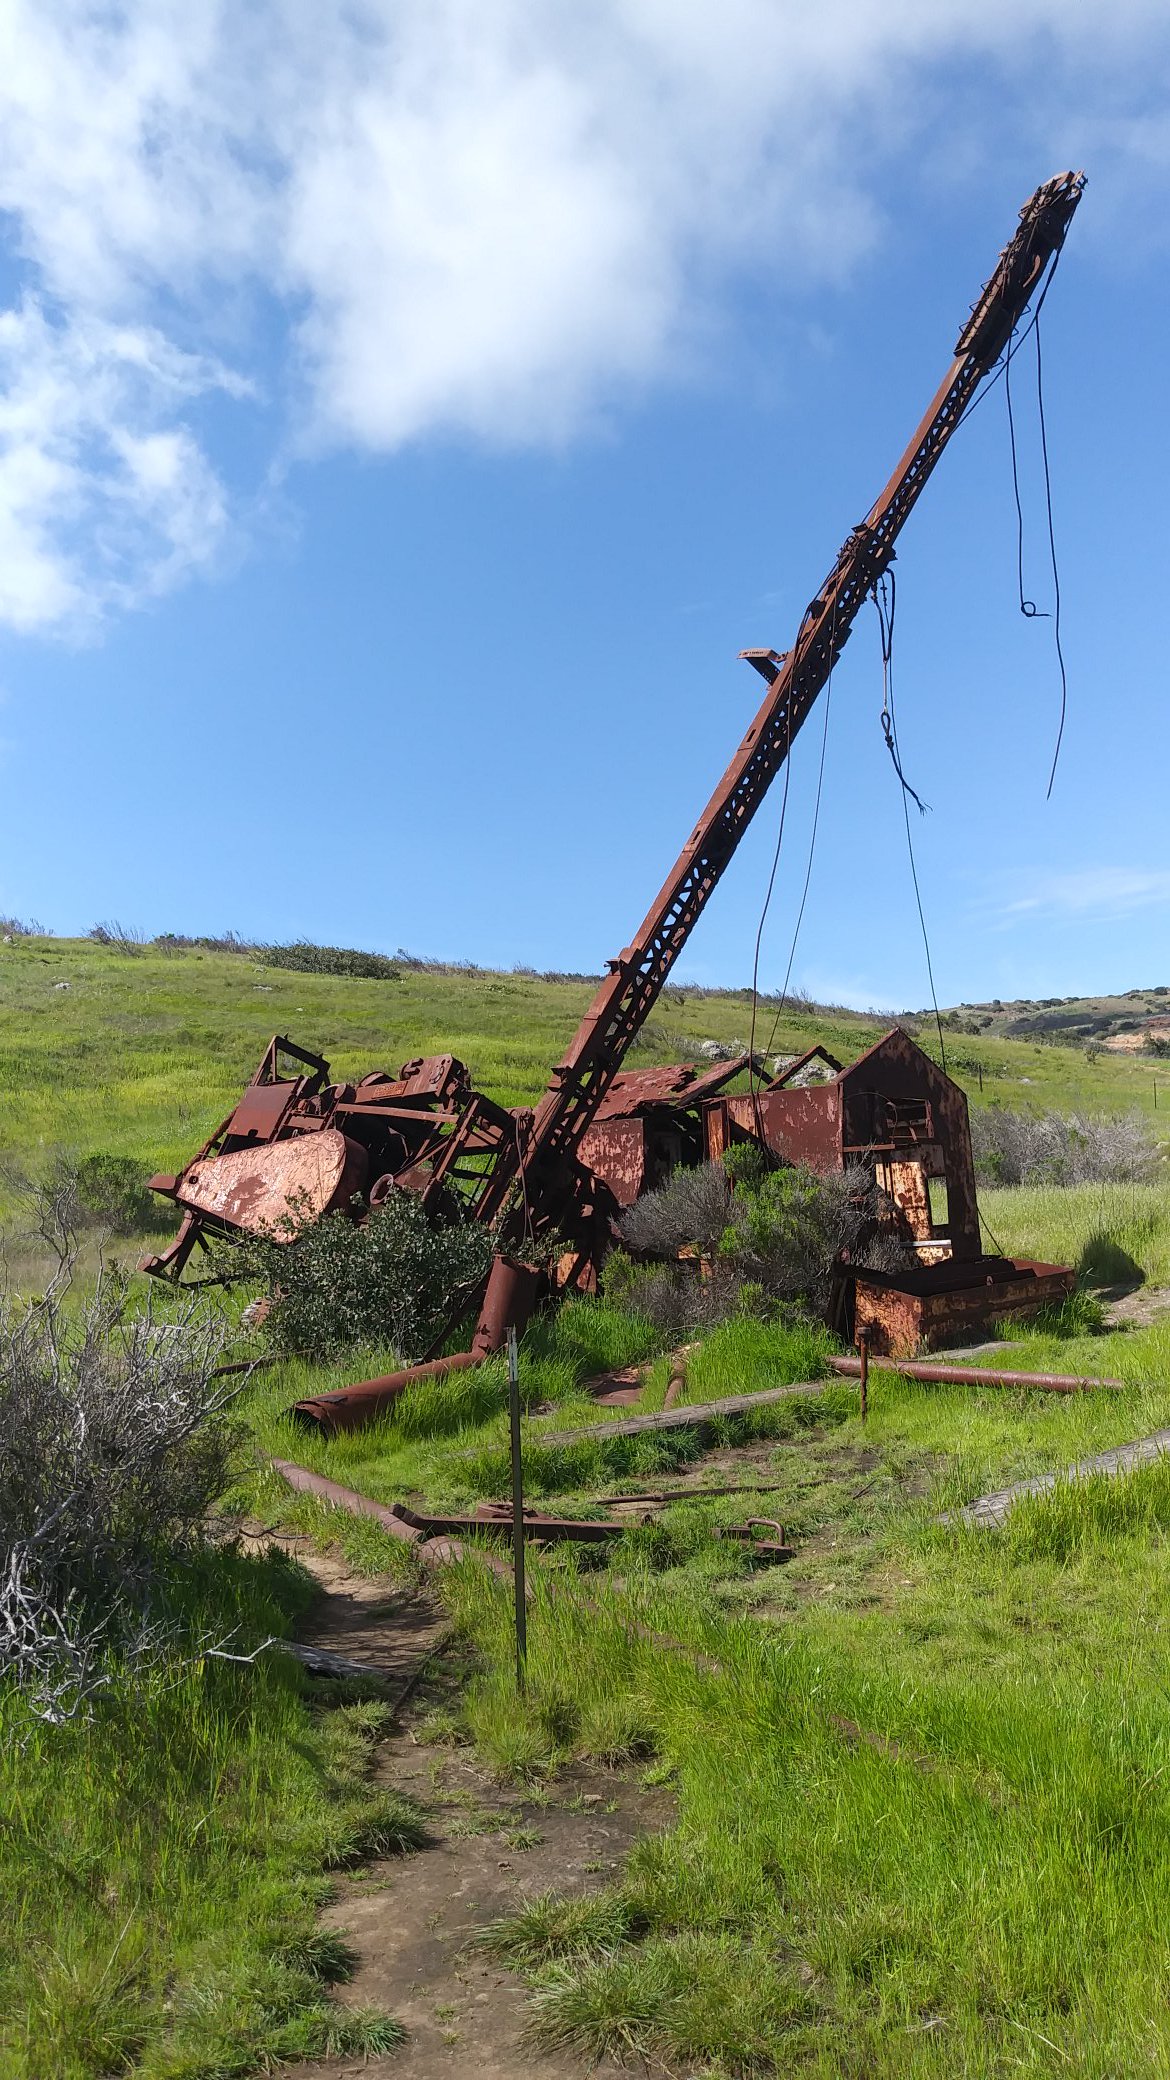 derelict well site with rusted equipment